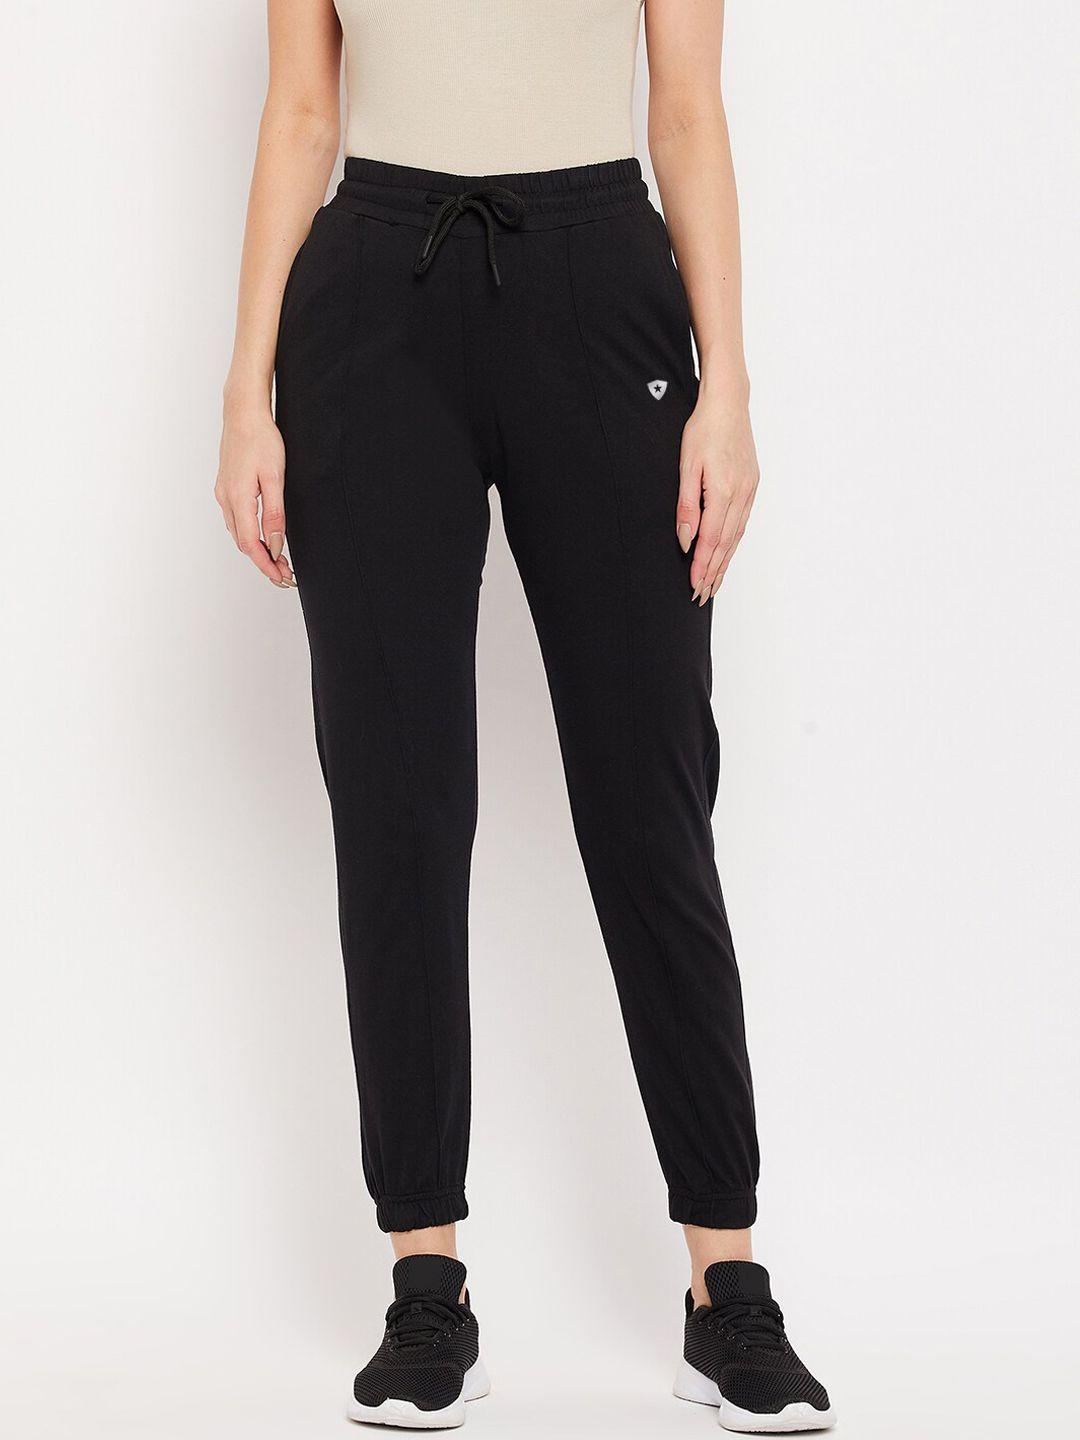 french flexious women dry fit anti bacterial cotton joggers